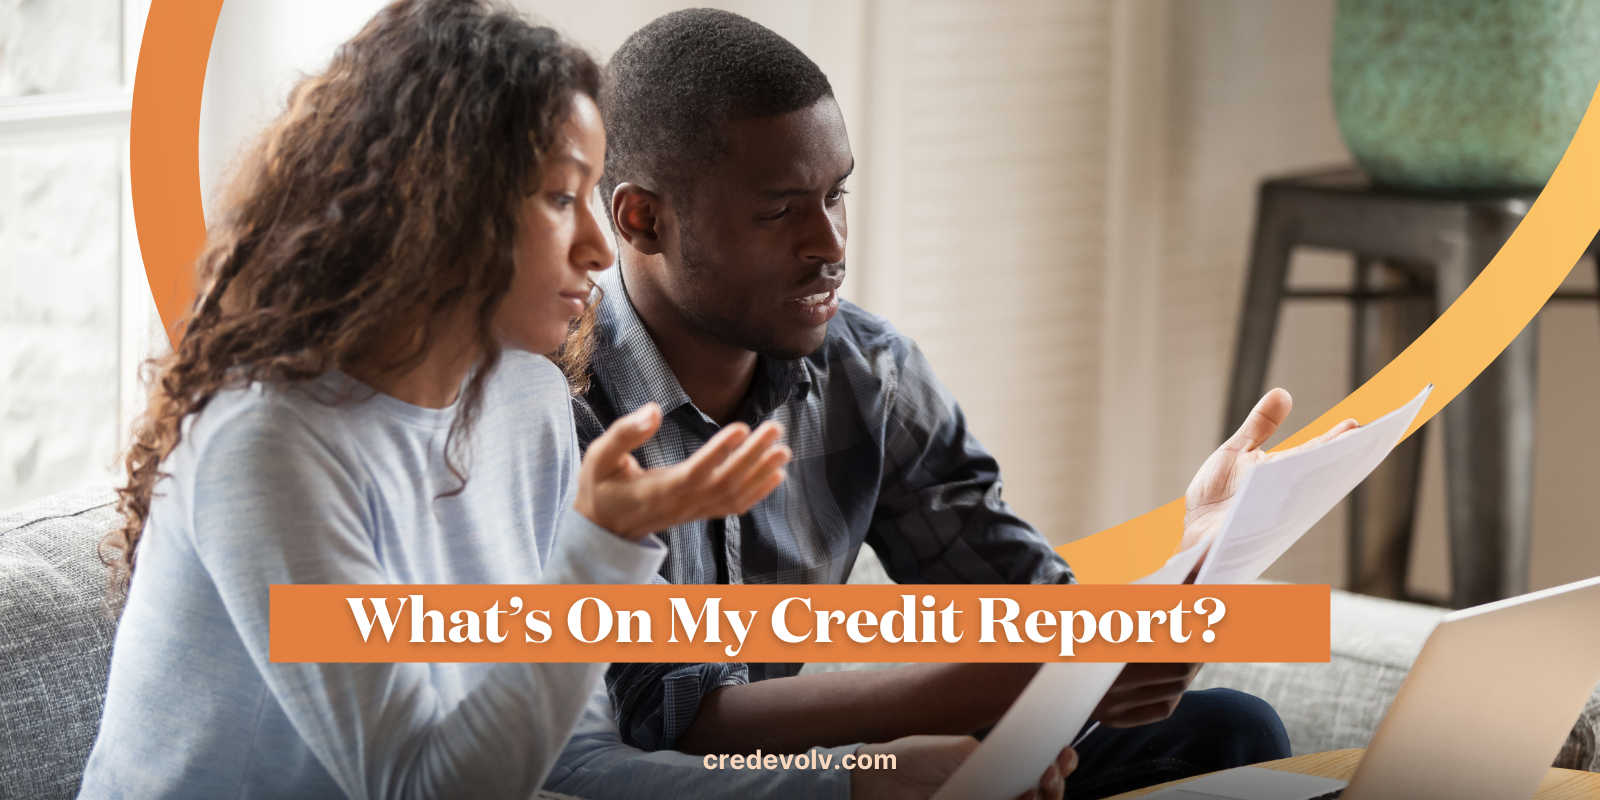 CredEvolv Blog - Featured Image - What's On My Credit Report